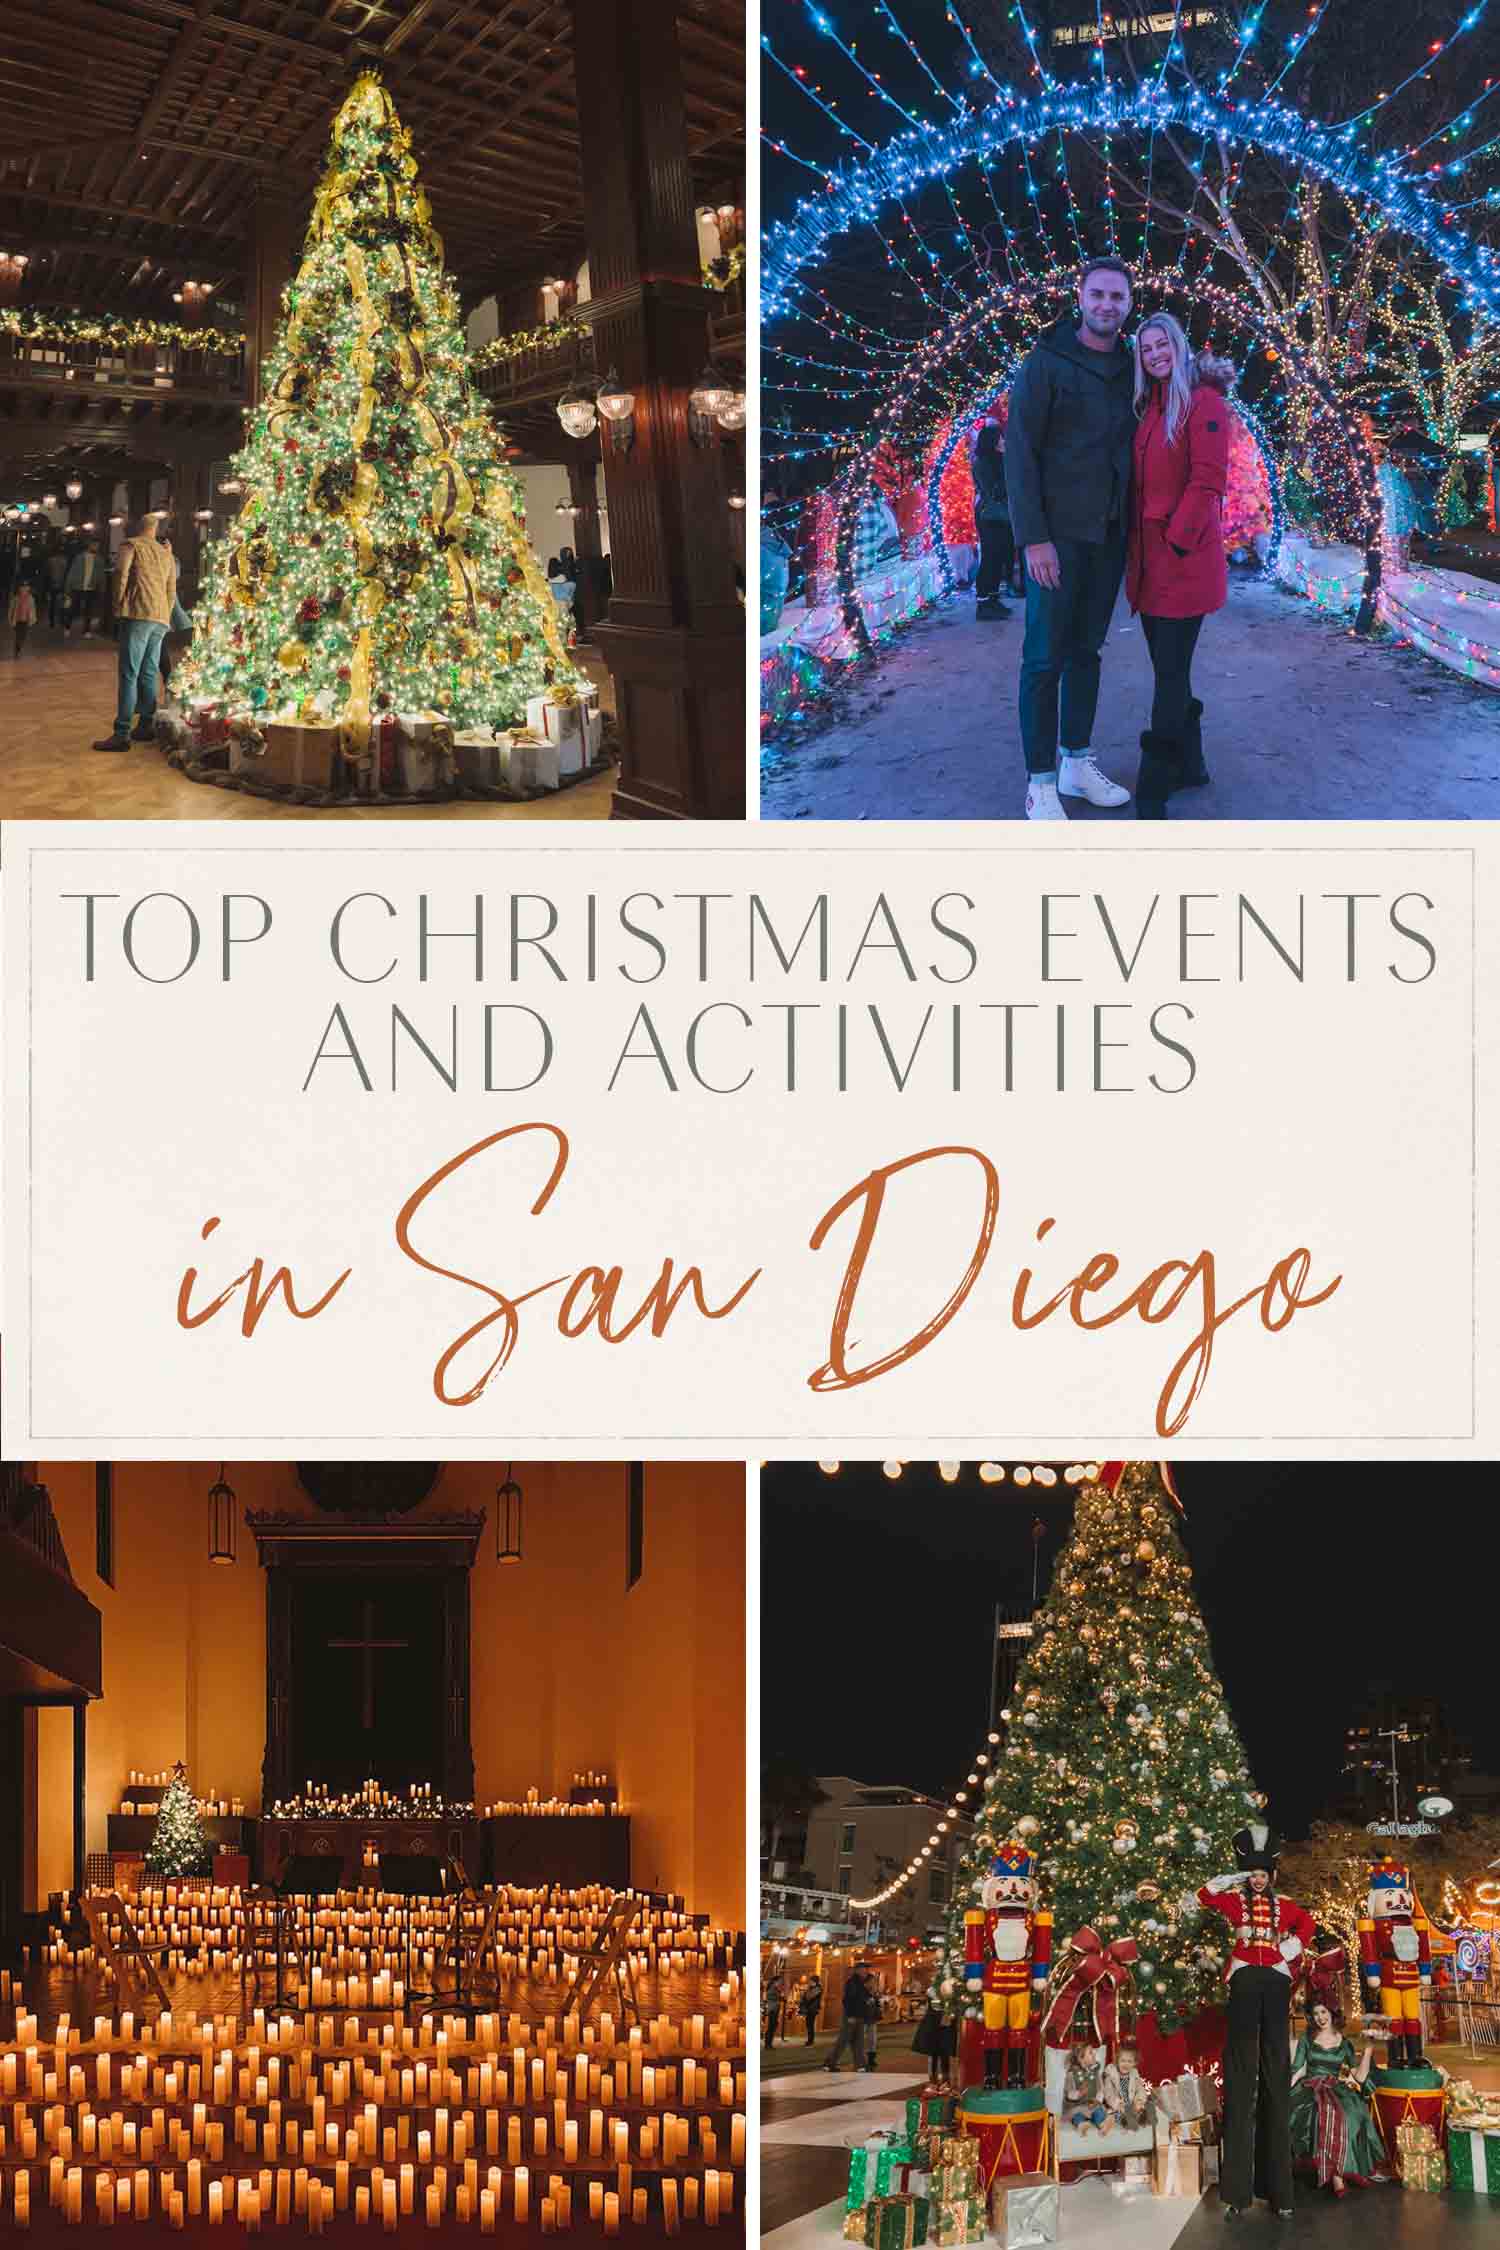 Top Christmas Events and Activities San Diego